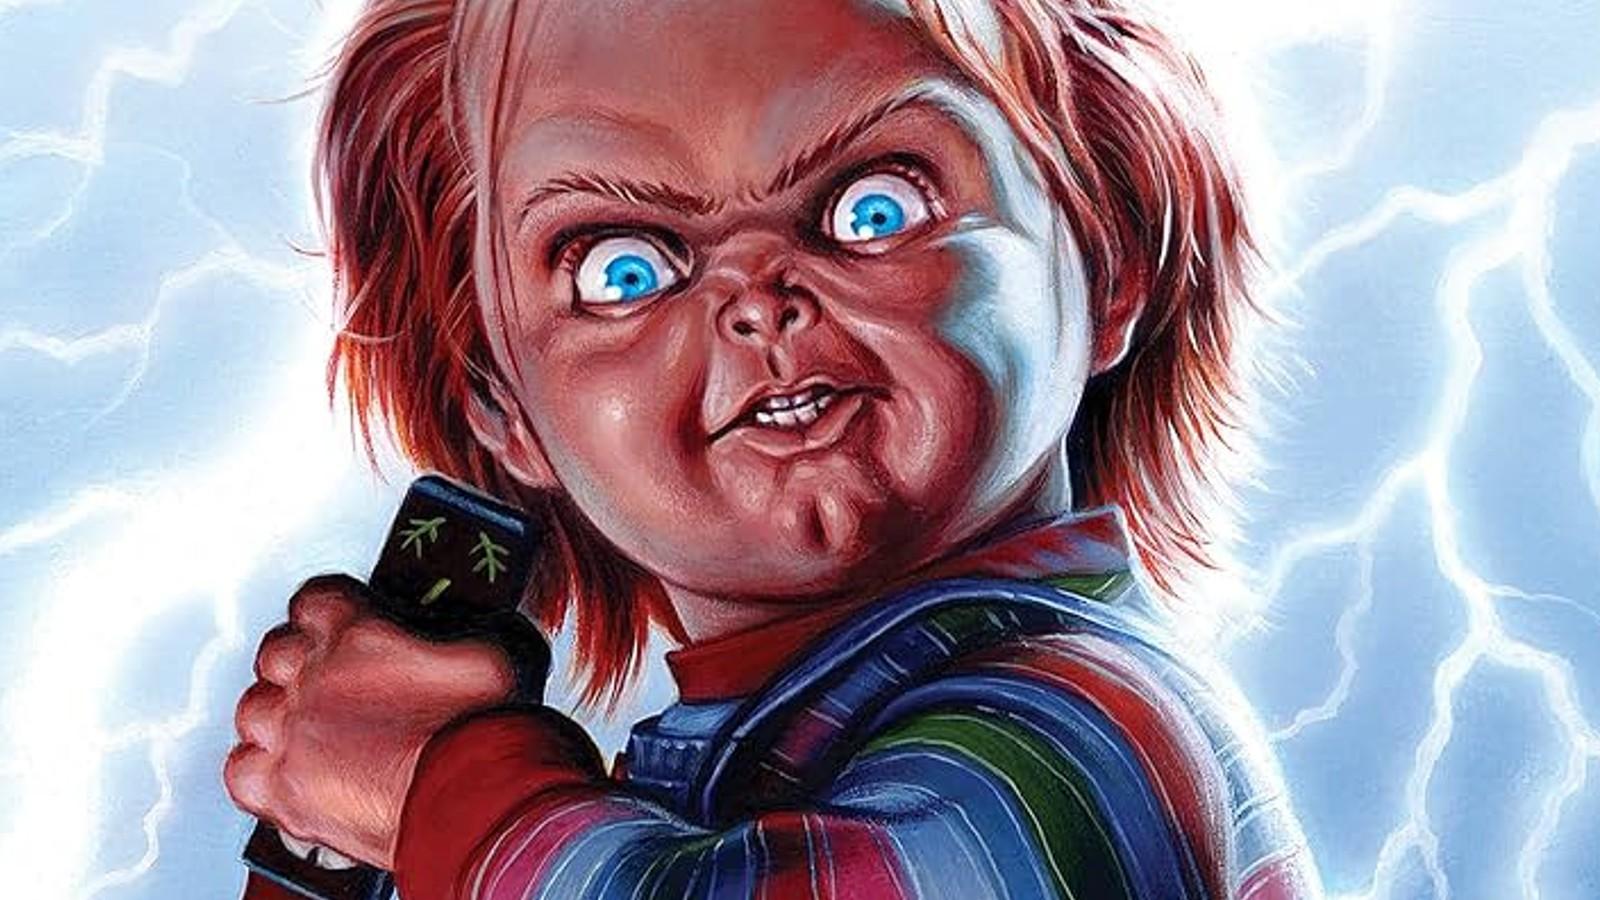 Killer doll Chucky brandishing a knife in Child's Play.